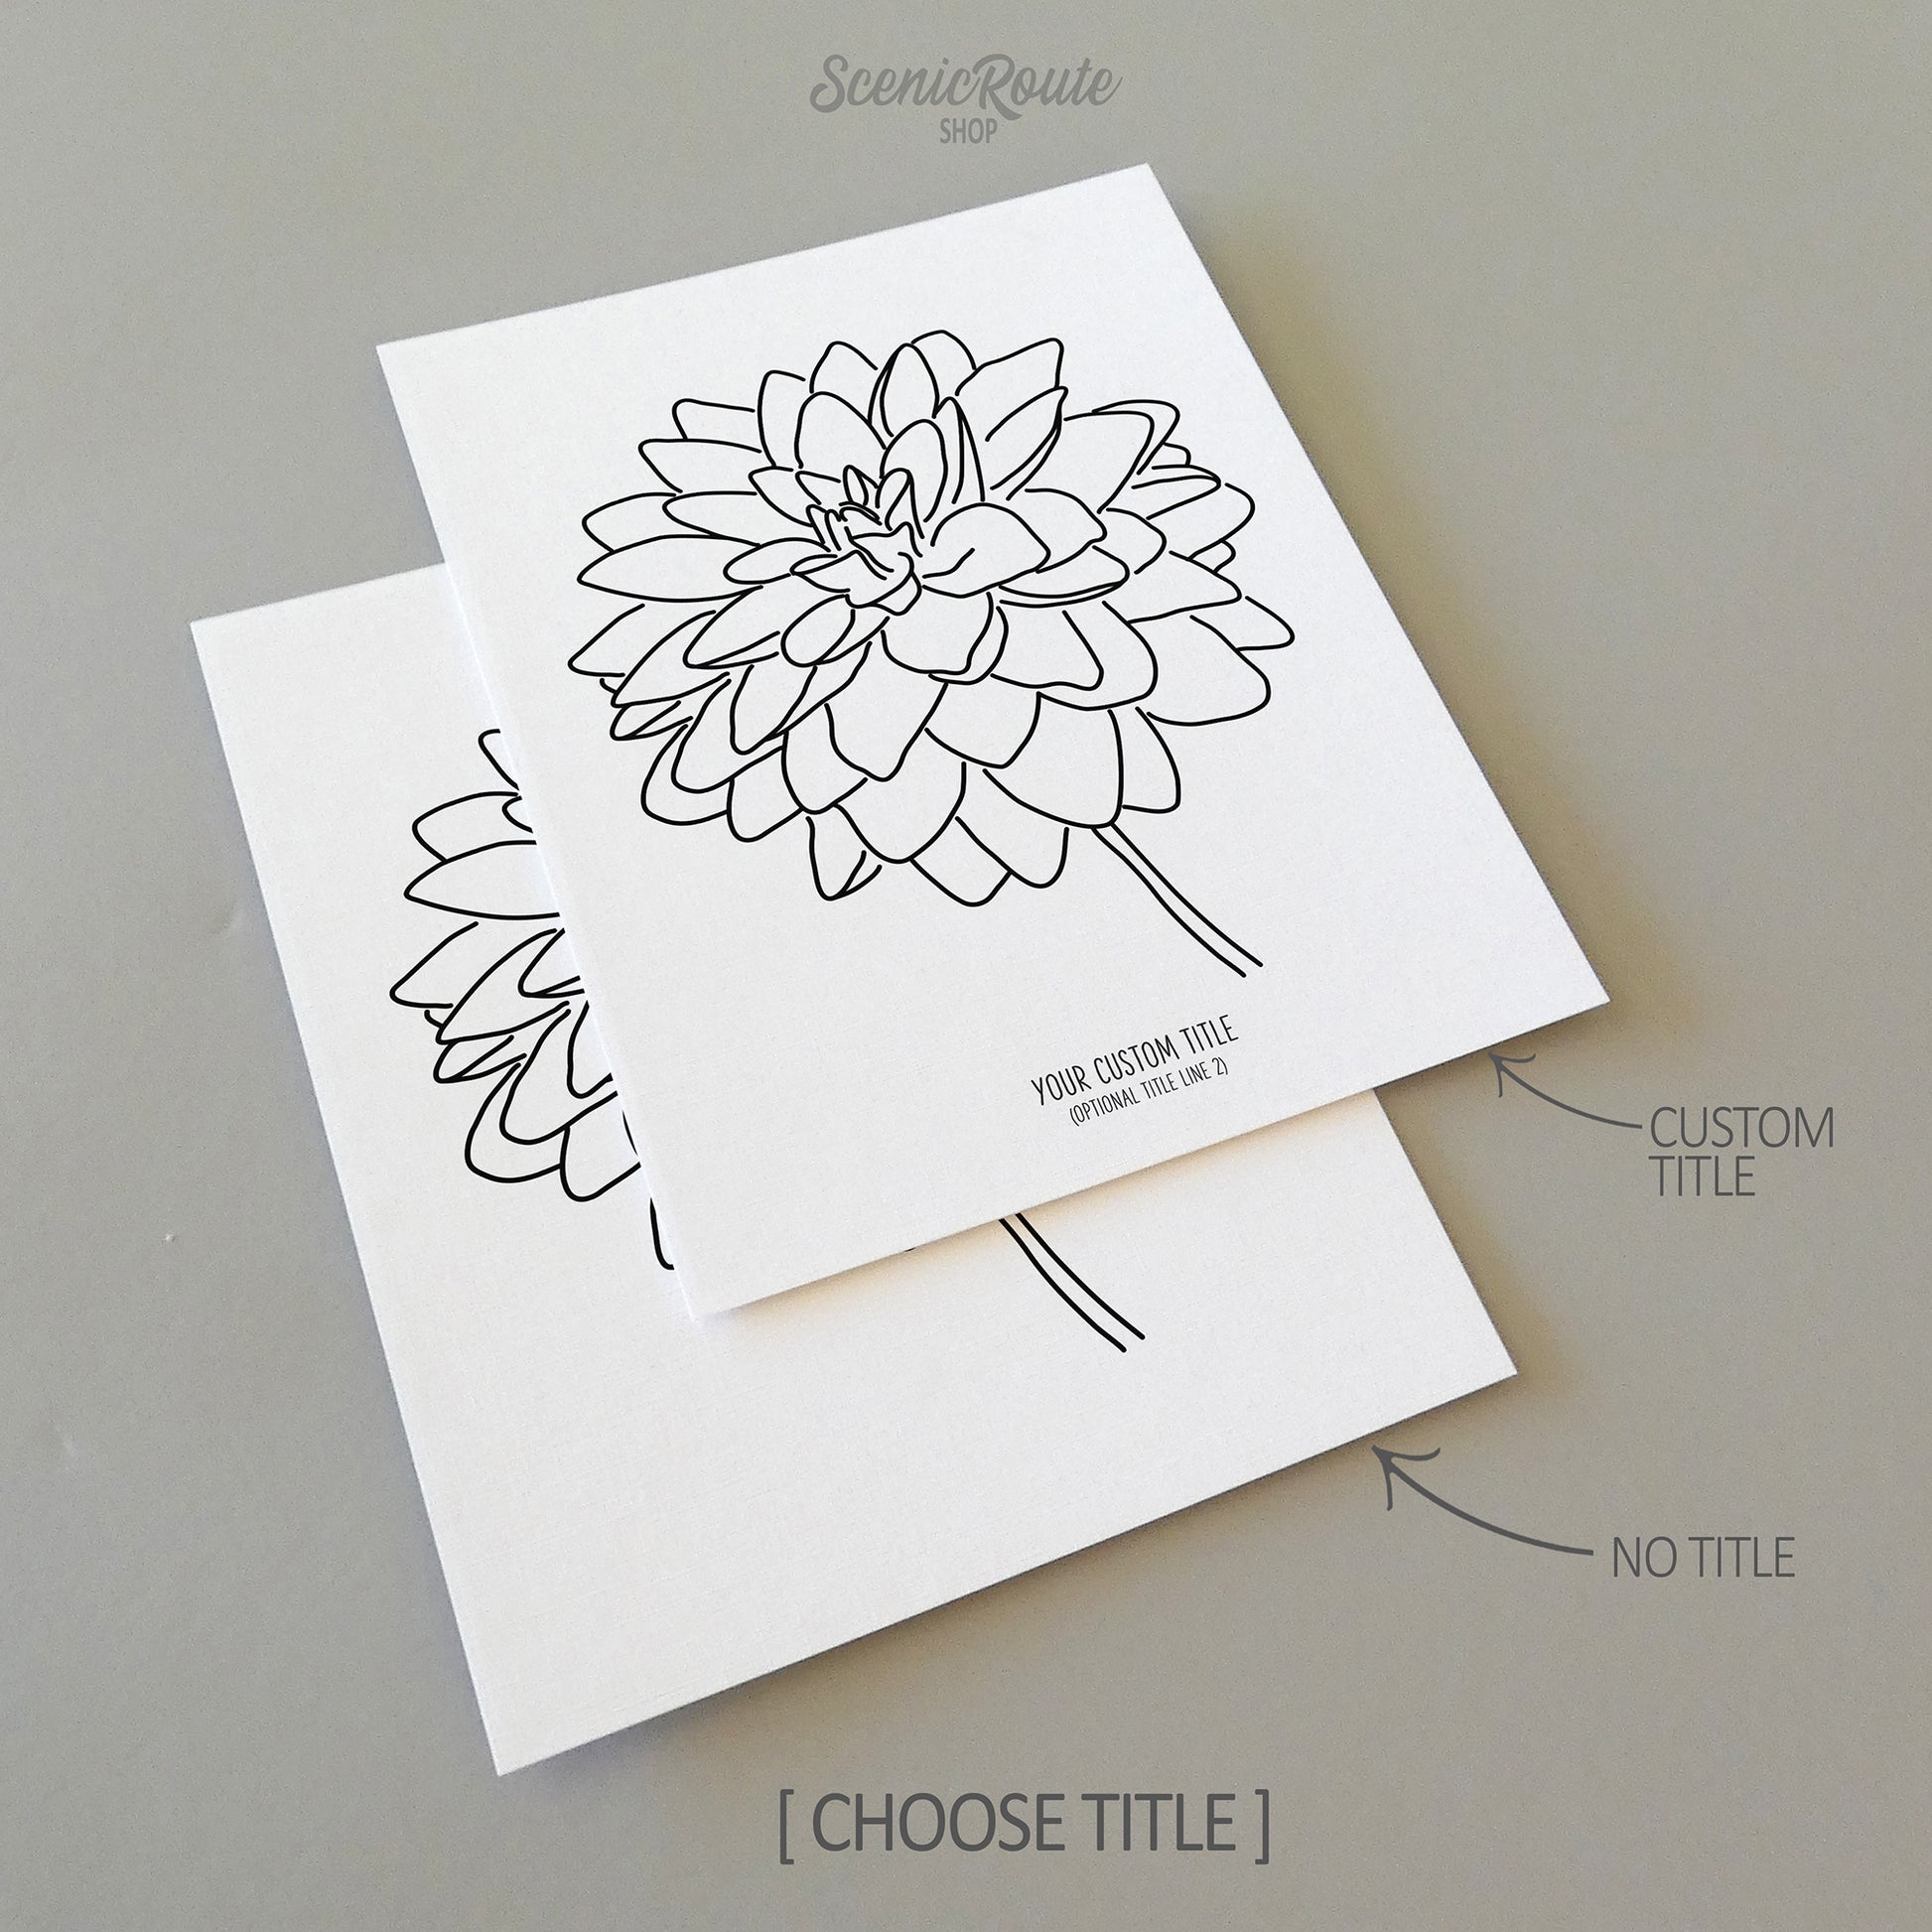 Two line art drawings of a Dahlia Flower on white linen paper with a gray background.  The pieces are shown with “No Title” and “Custom Title” options for the available art print options.